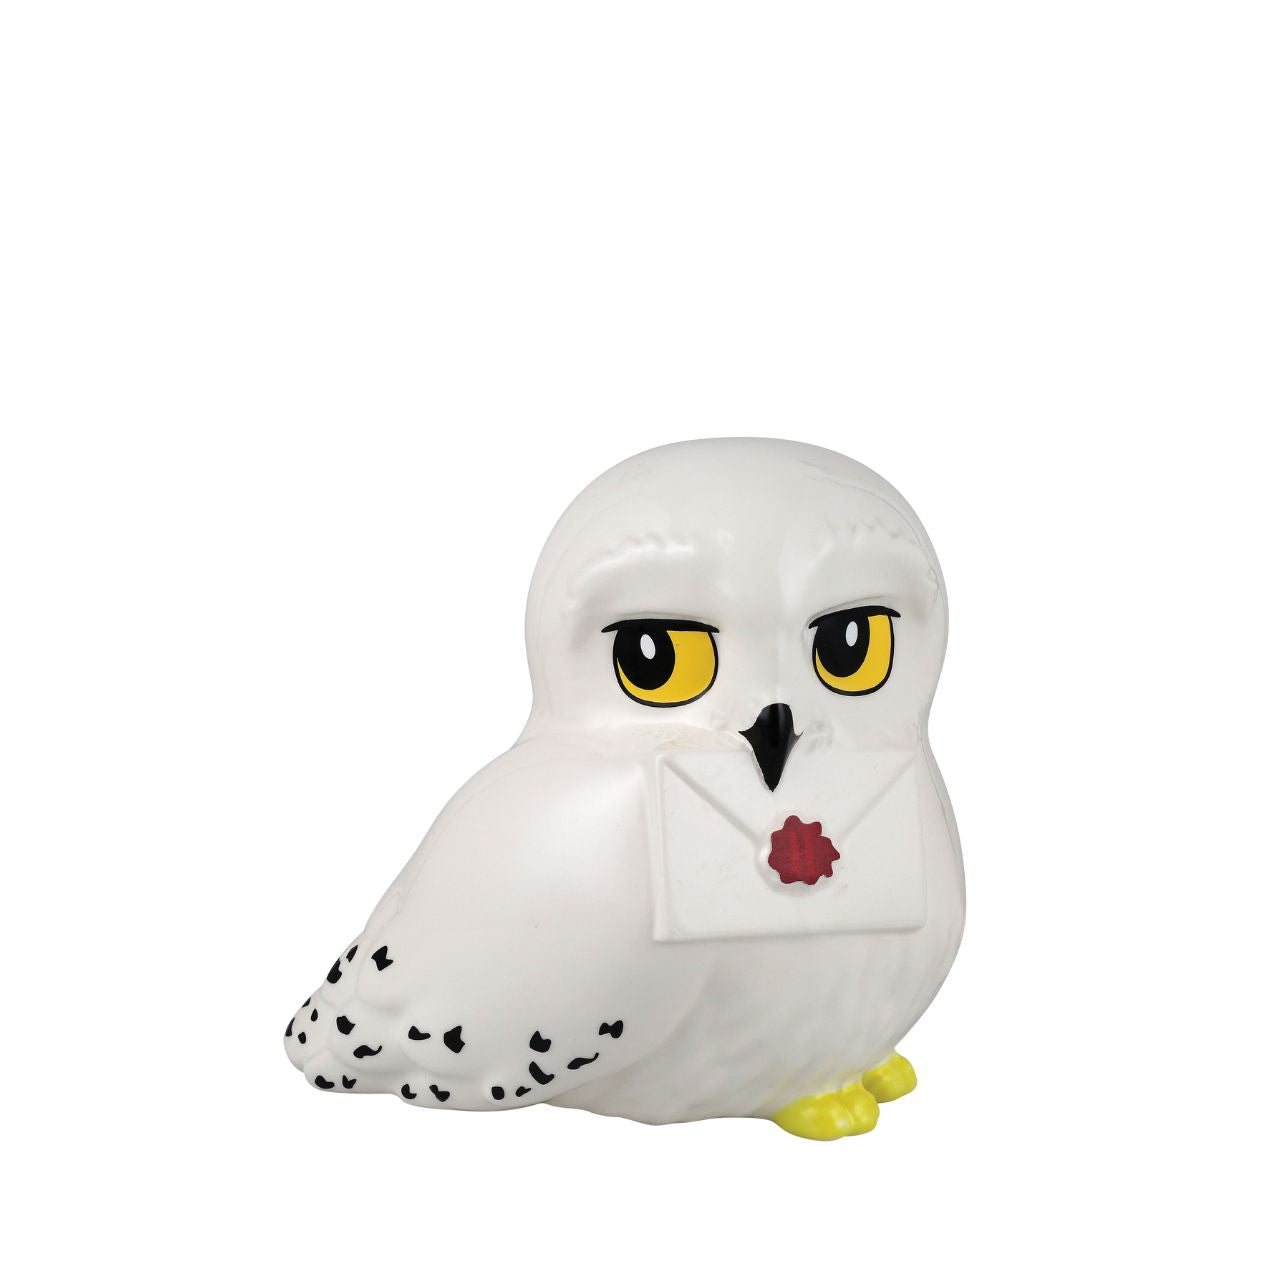 Sculpted Hedwig Money Bank  This sculpted Hedwig money bank holds a Hogwarts letter in her beak. This cute Owl is based on Harry Potter's own pet that we see throughout the film franchise. With a coin slot hidden on the back of her head, this is the perfect gift for any fan, young or old.